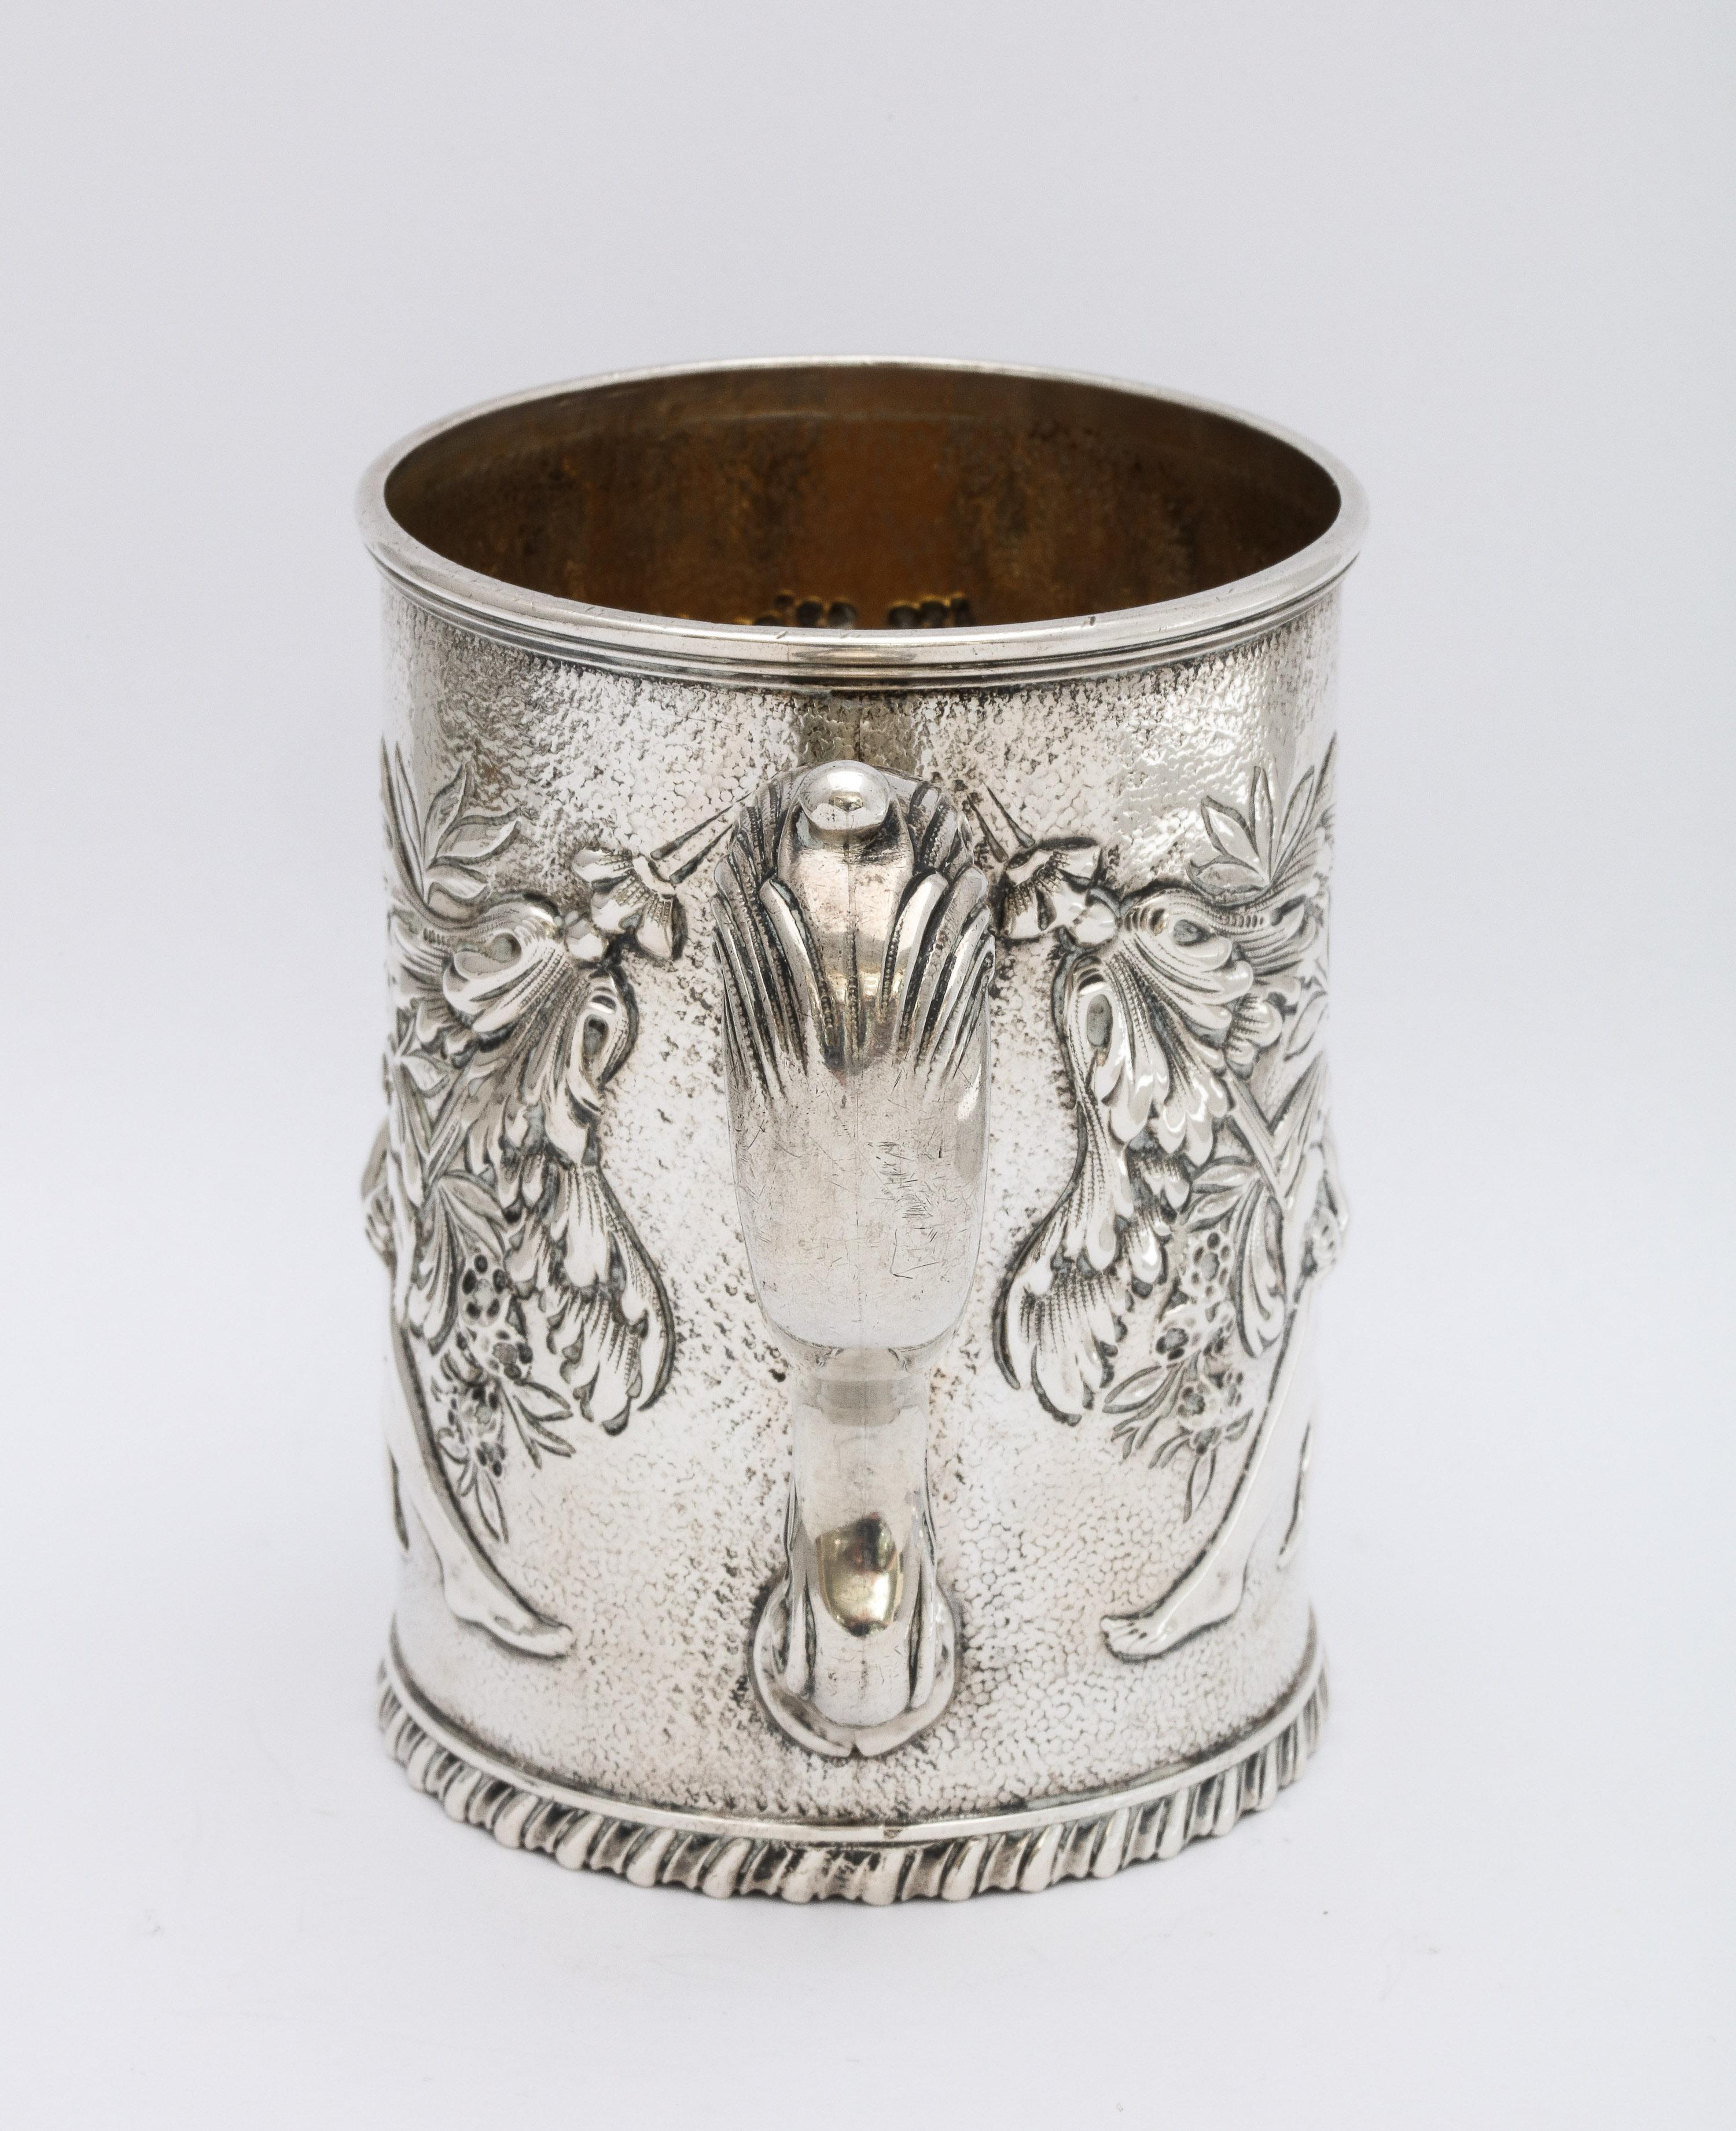 Neoclassical Sterling Silver Mug/Cup by The Whiting Mfg. Co. For Sale 1